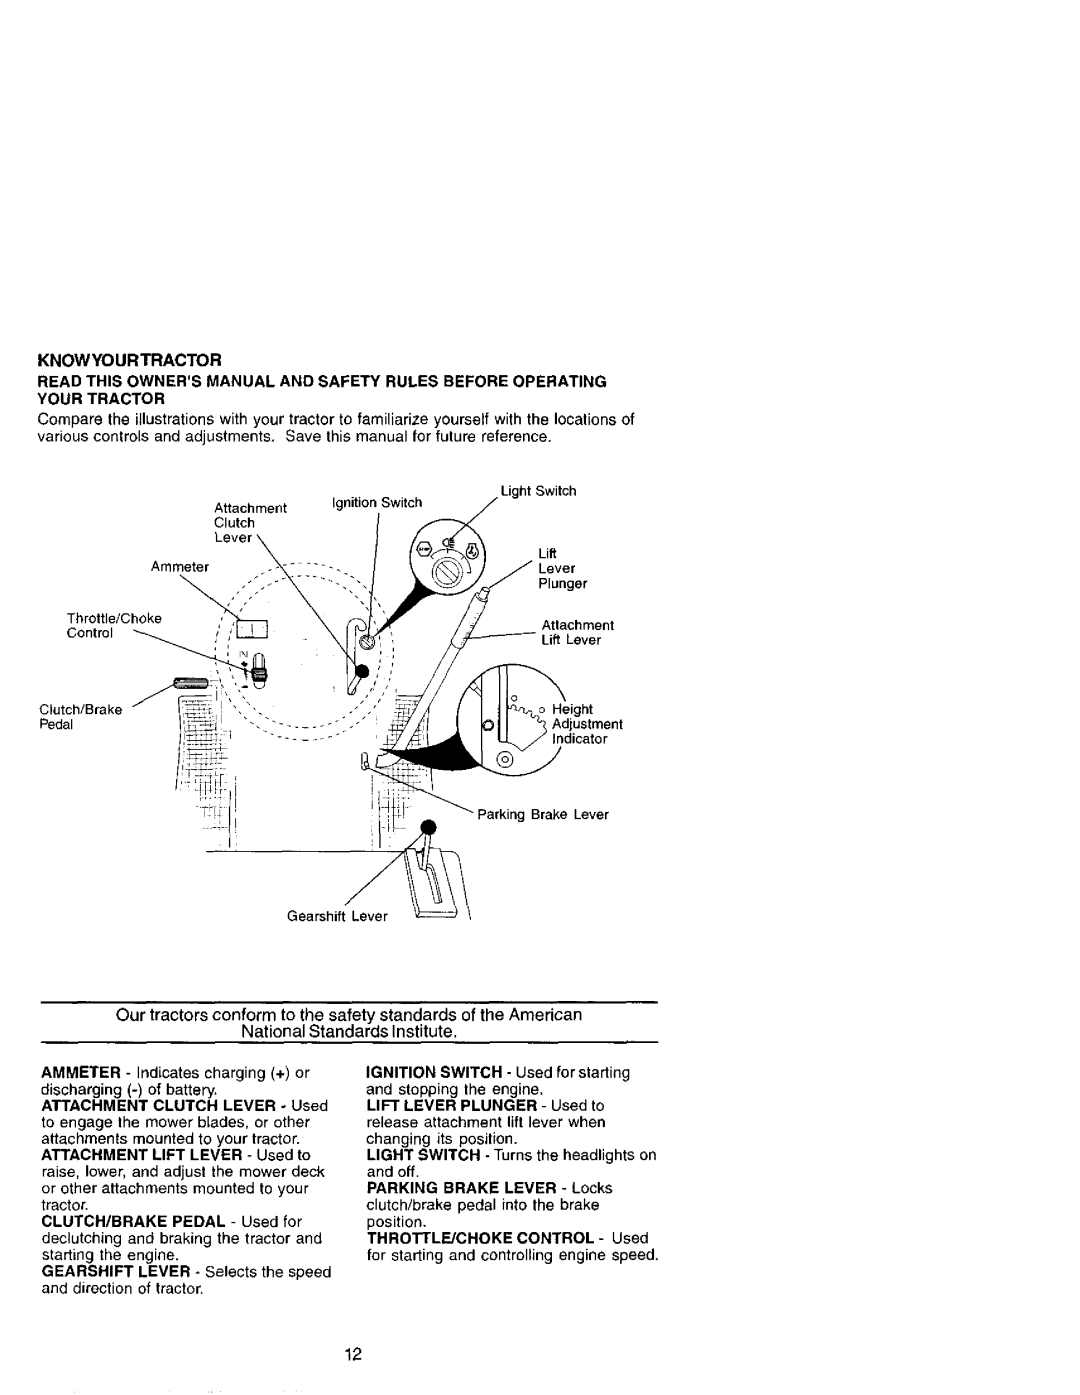 Craftsman 917.27207 owner manual National Standards Institute, Knowyourtractor, ATTACHMENT CLUTCH LEVER - Used 